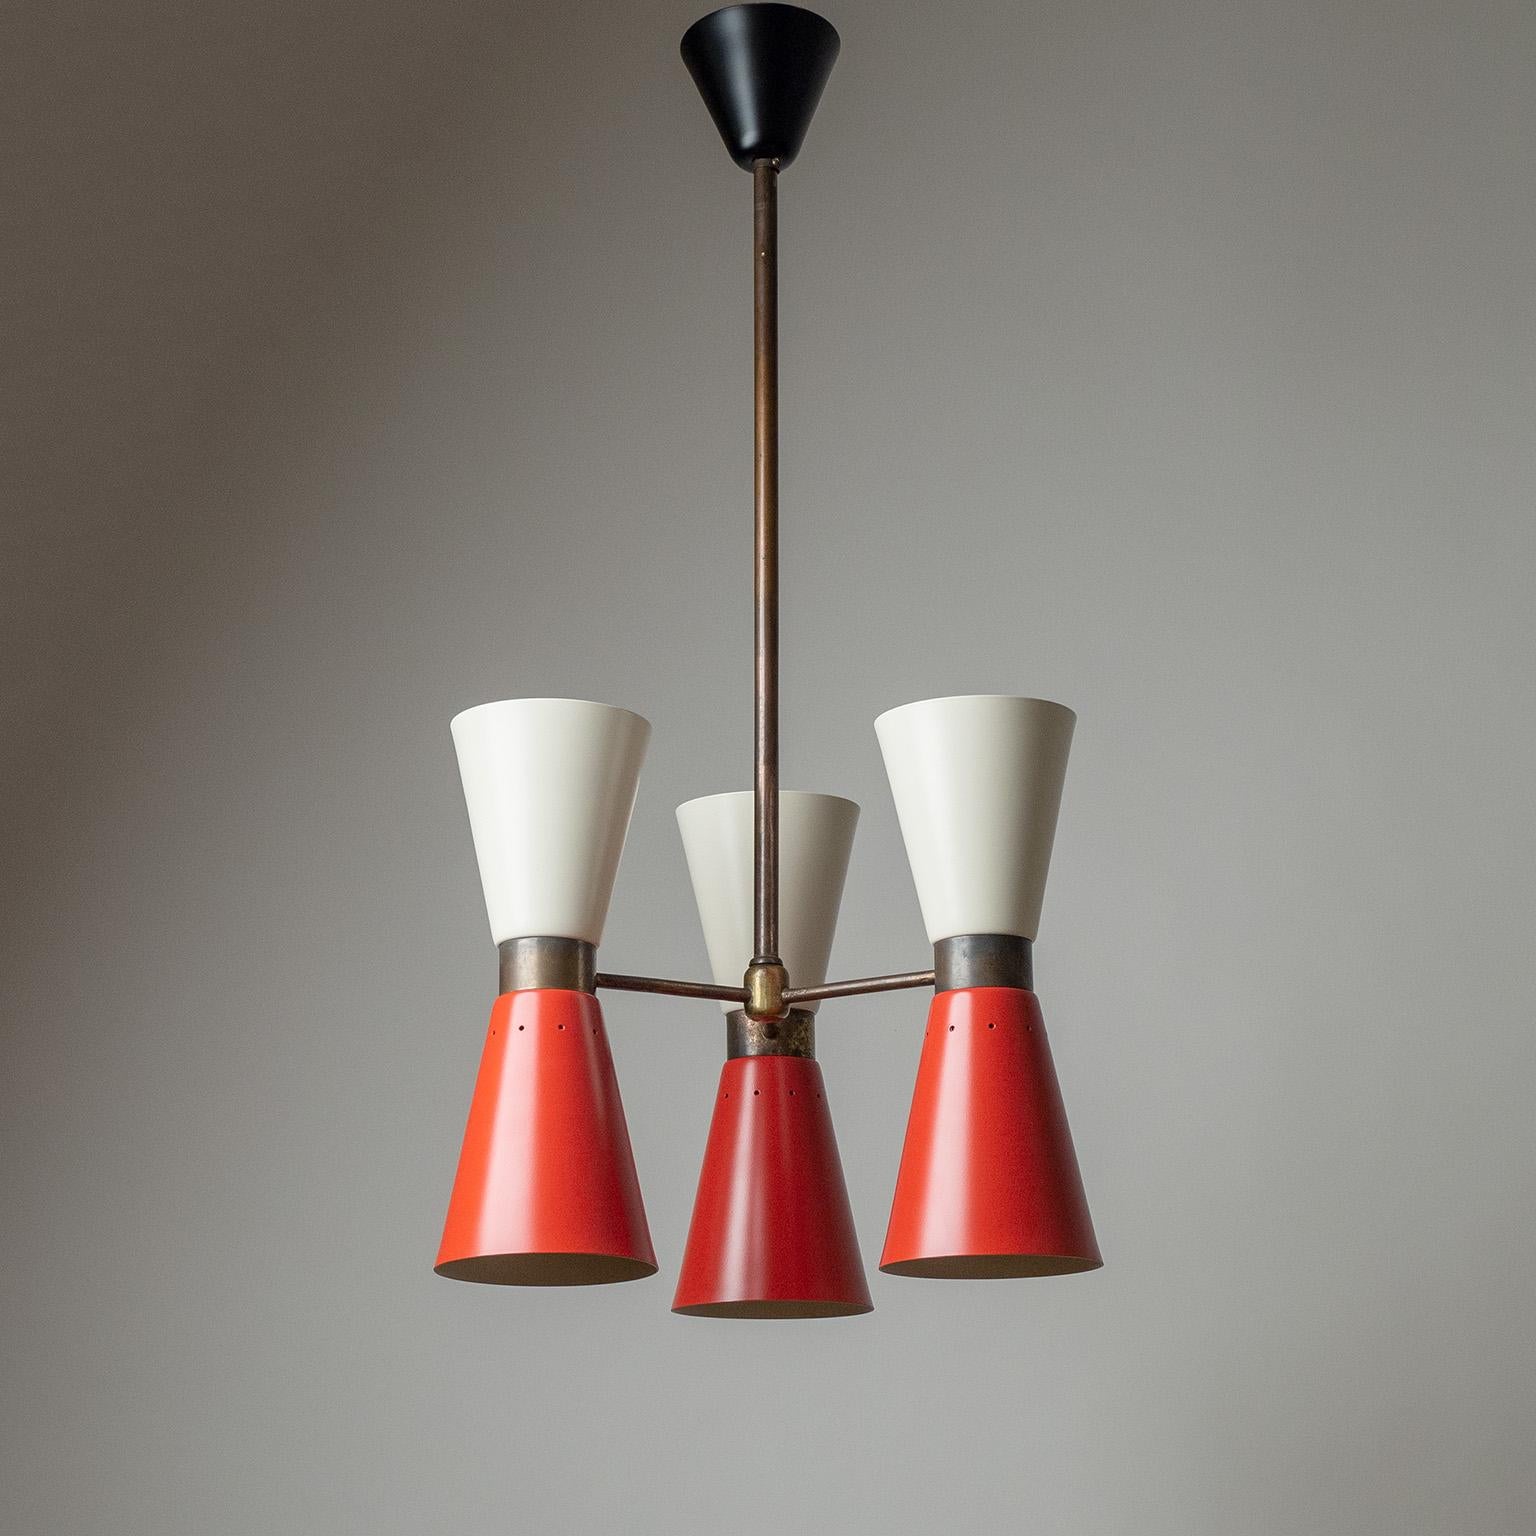 Italian cone chandelier from the 1950s. Brass structure with three arms, each with two lacquered cones, professionally repainted in their original colors. Each cone is equipped with a brass and ceramic E27 socket providing simultaneous down- and